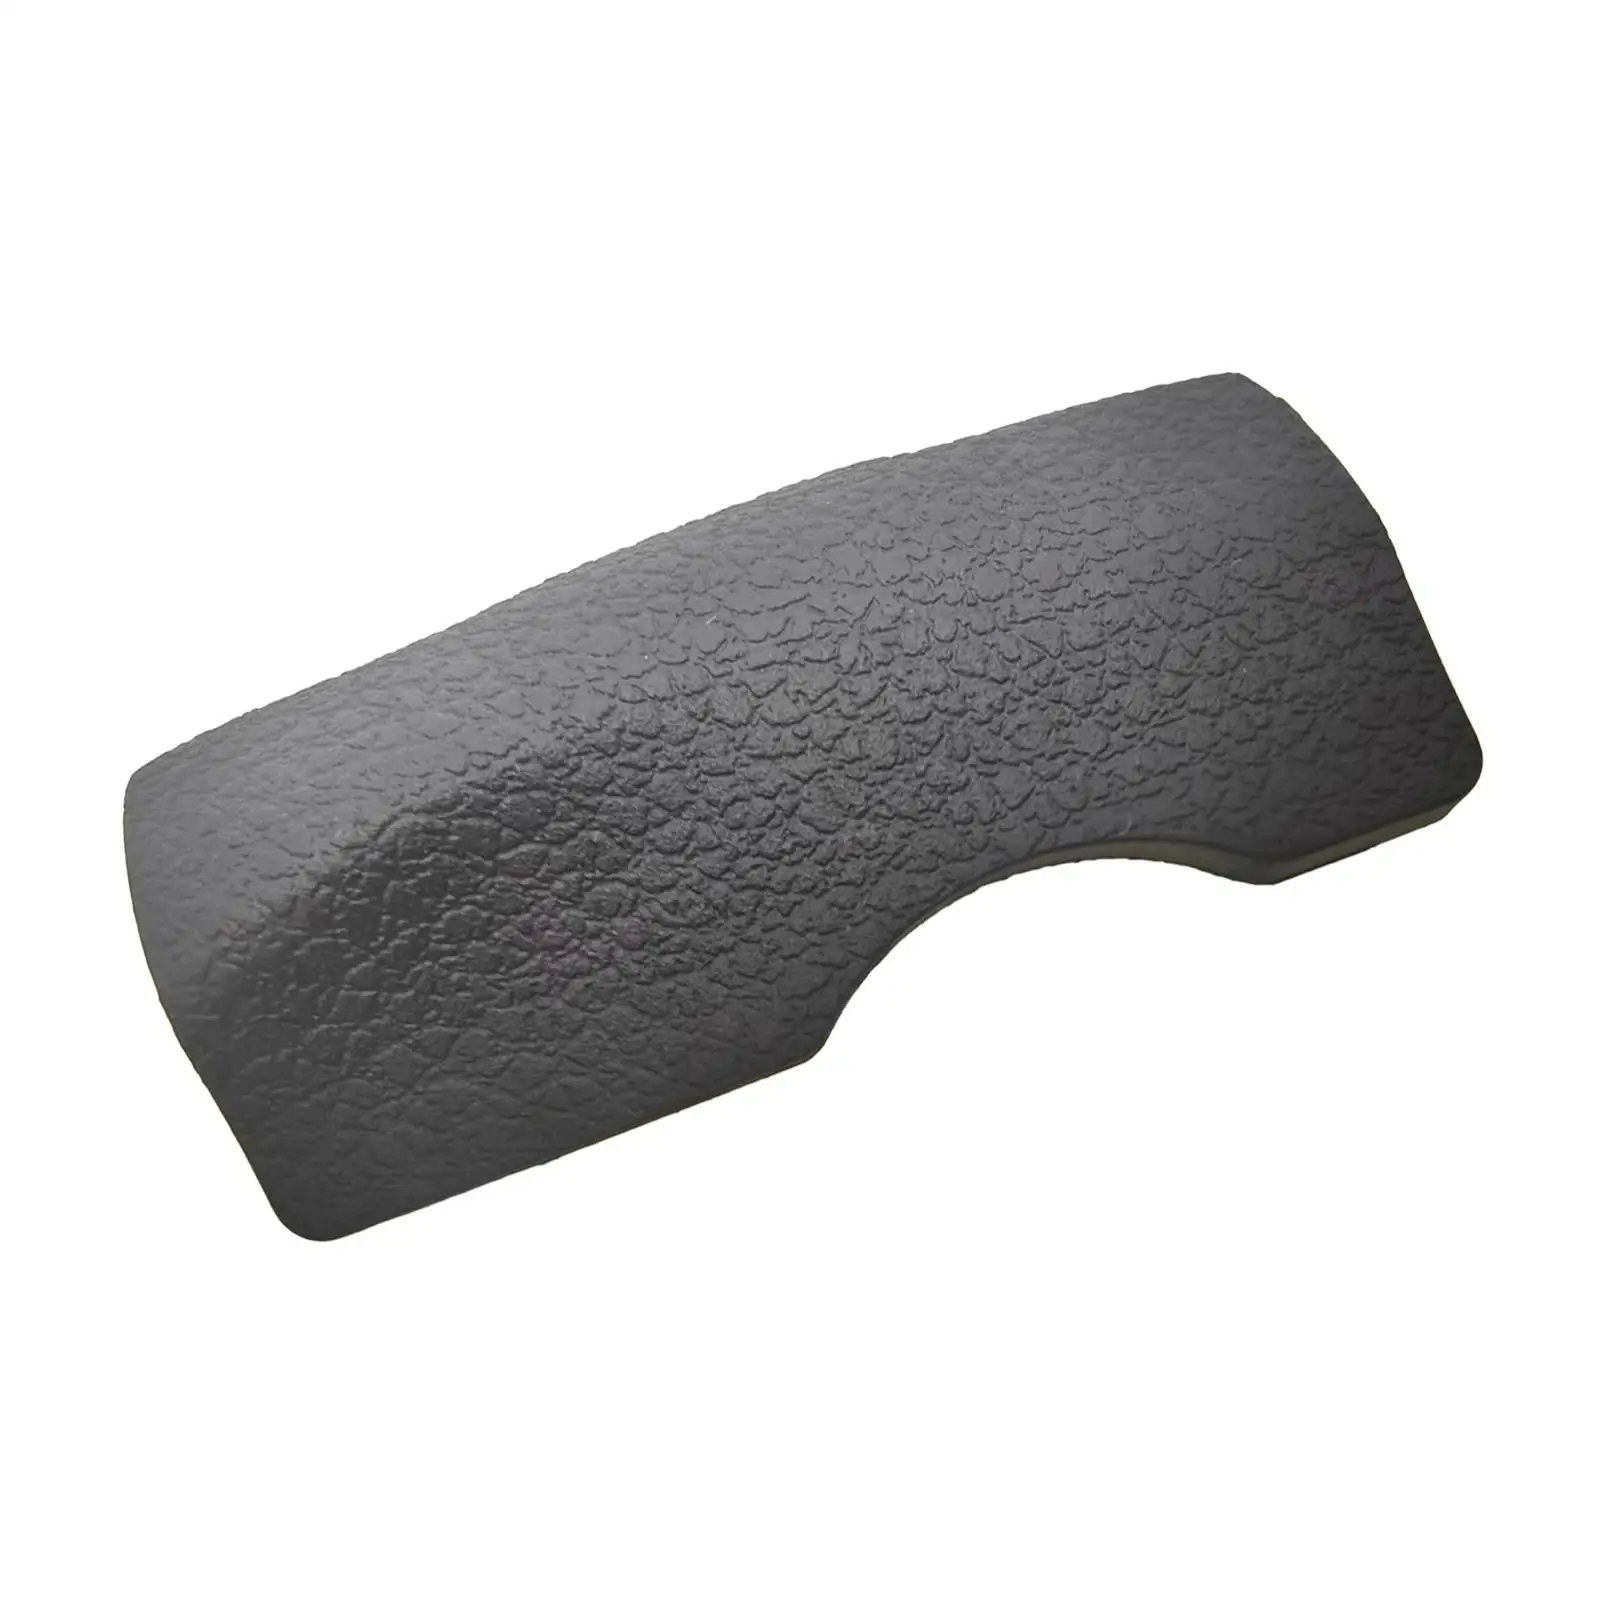 CF Memory Card Door Cover Lid Rubber Skin Professional Easy Installation Accessories Assembly Repair Parts Replaces for D4 Slr